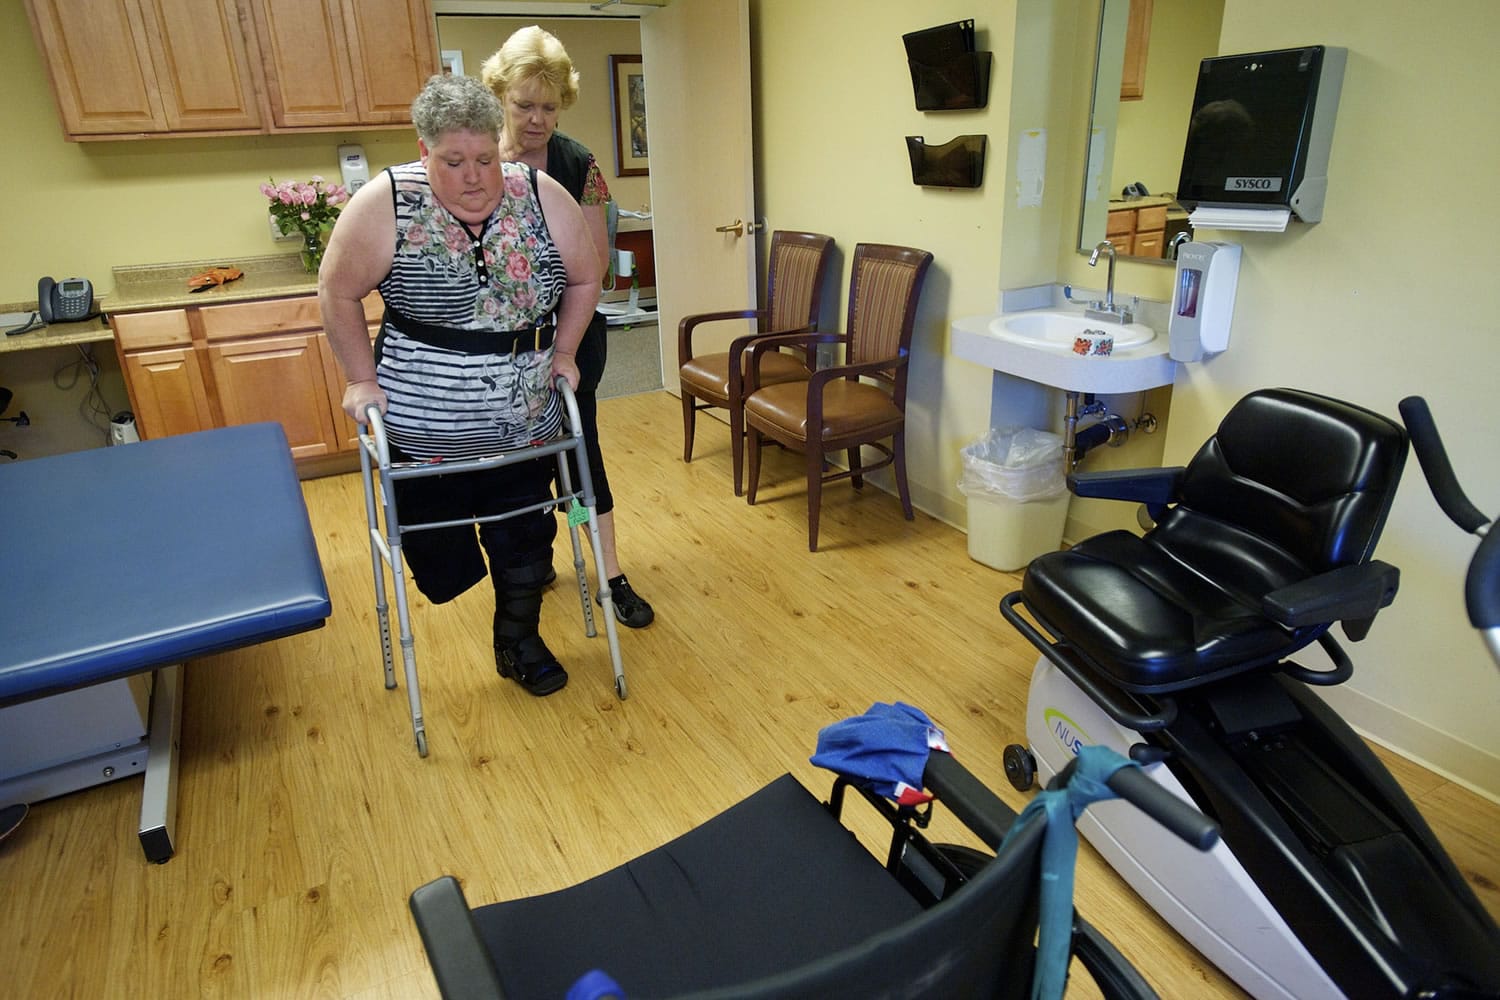 Physical therapist assistant Kathy Wiederman helps Kathy Hammersley walk using a walker at the Cascade Park Care Center.